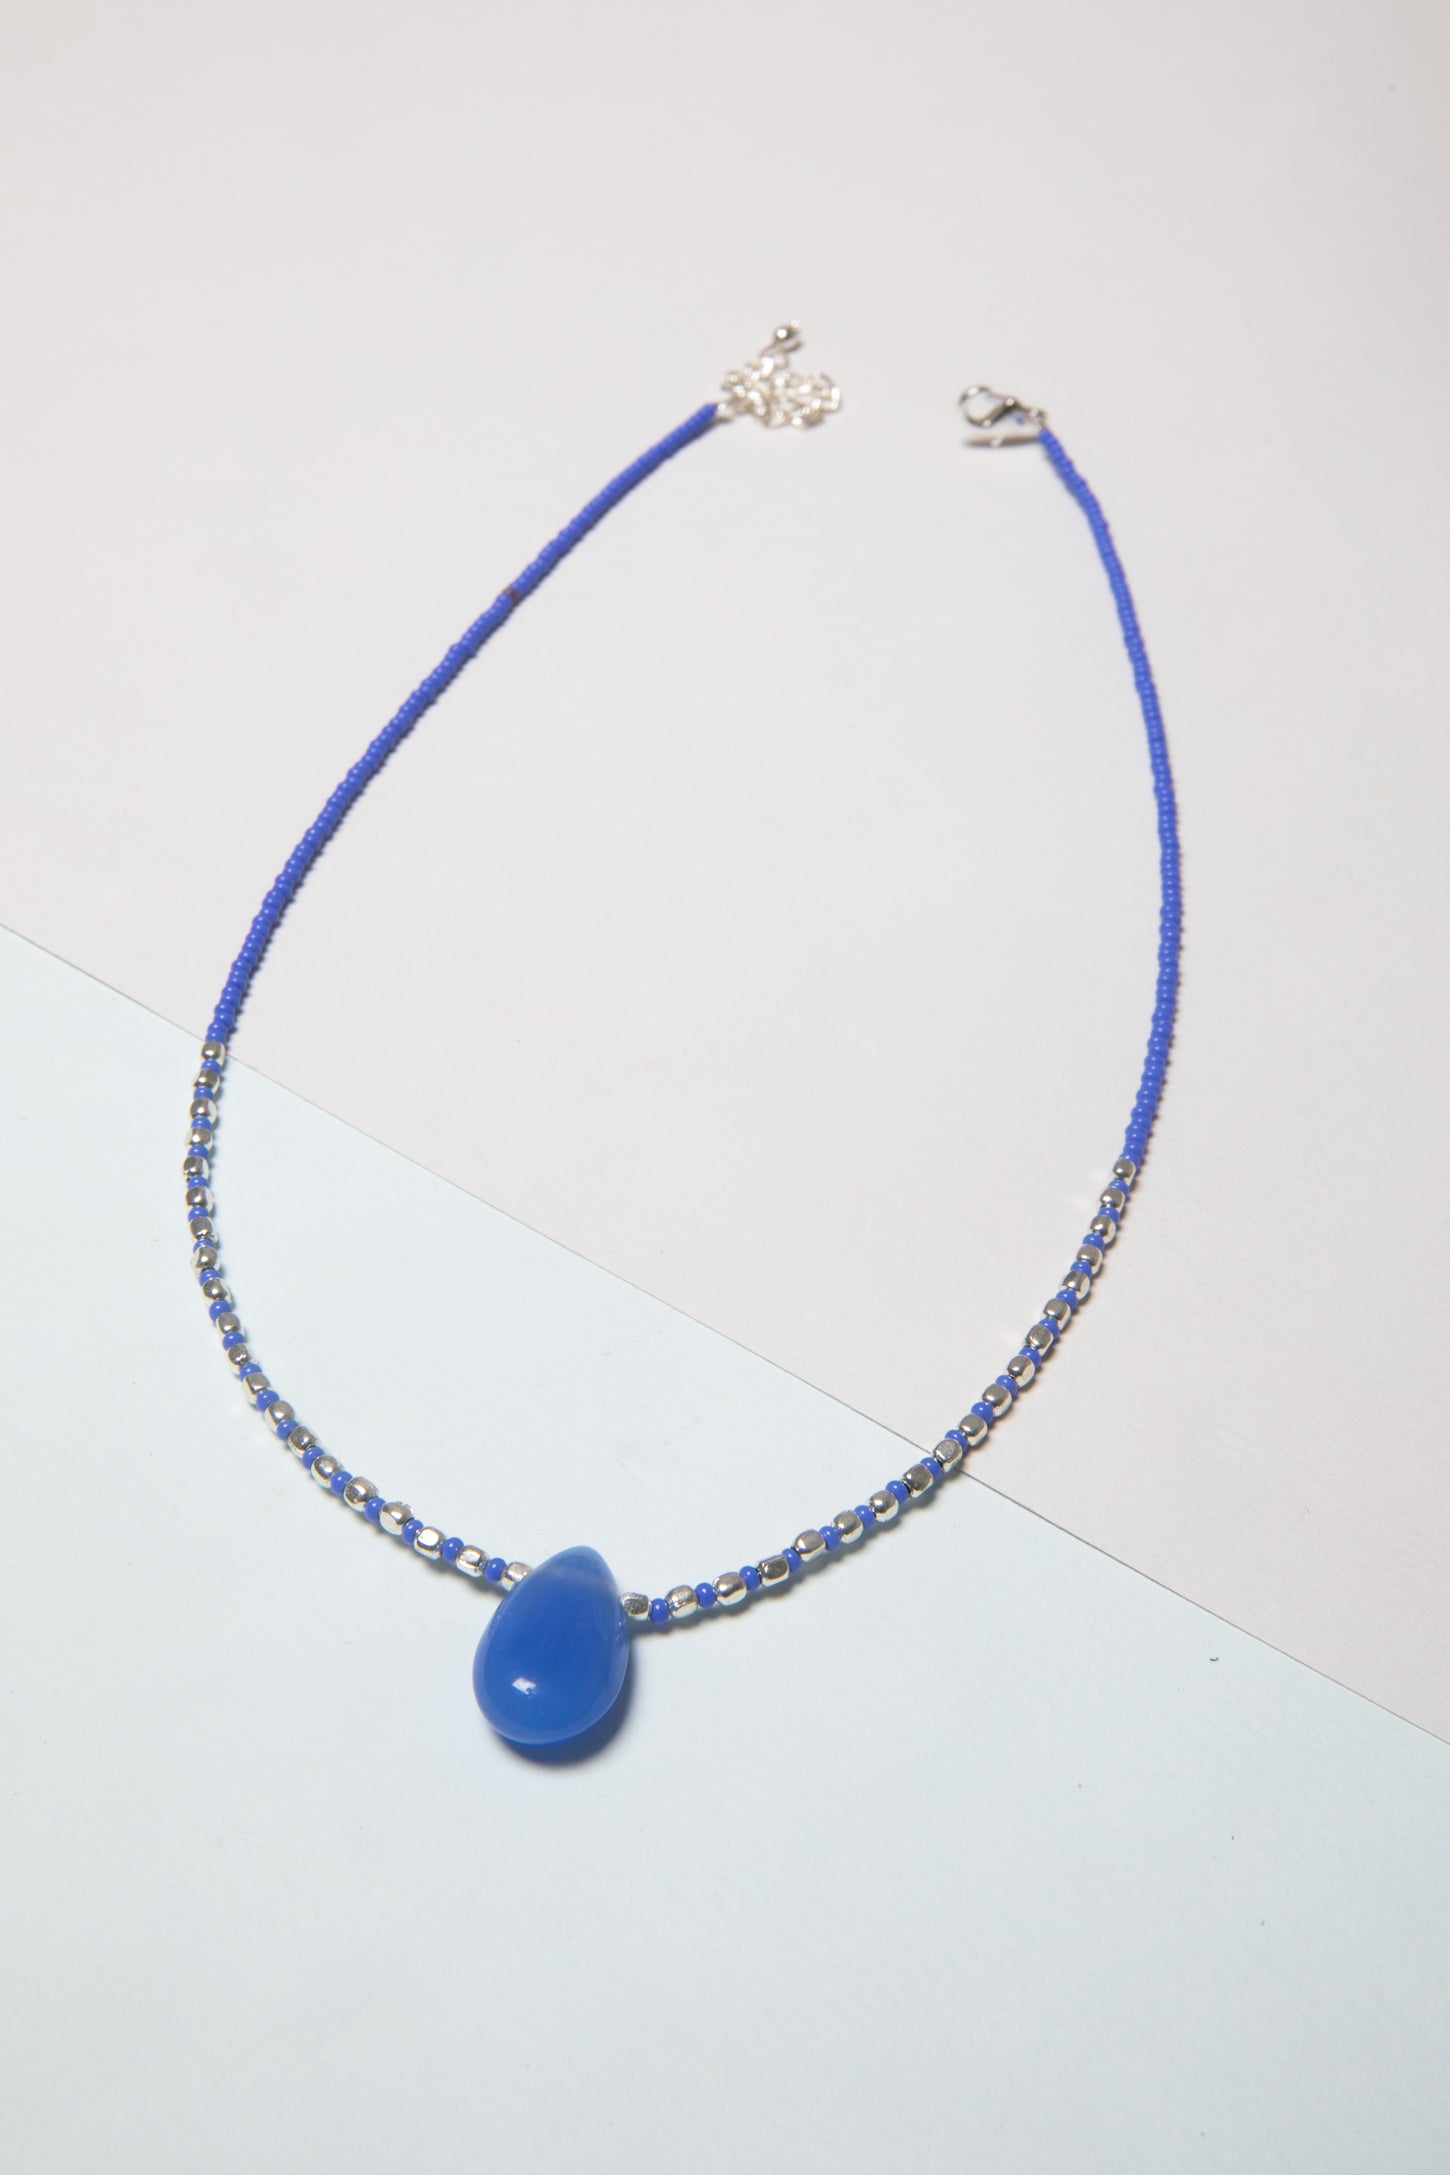 Seaglass Bead Necklace